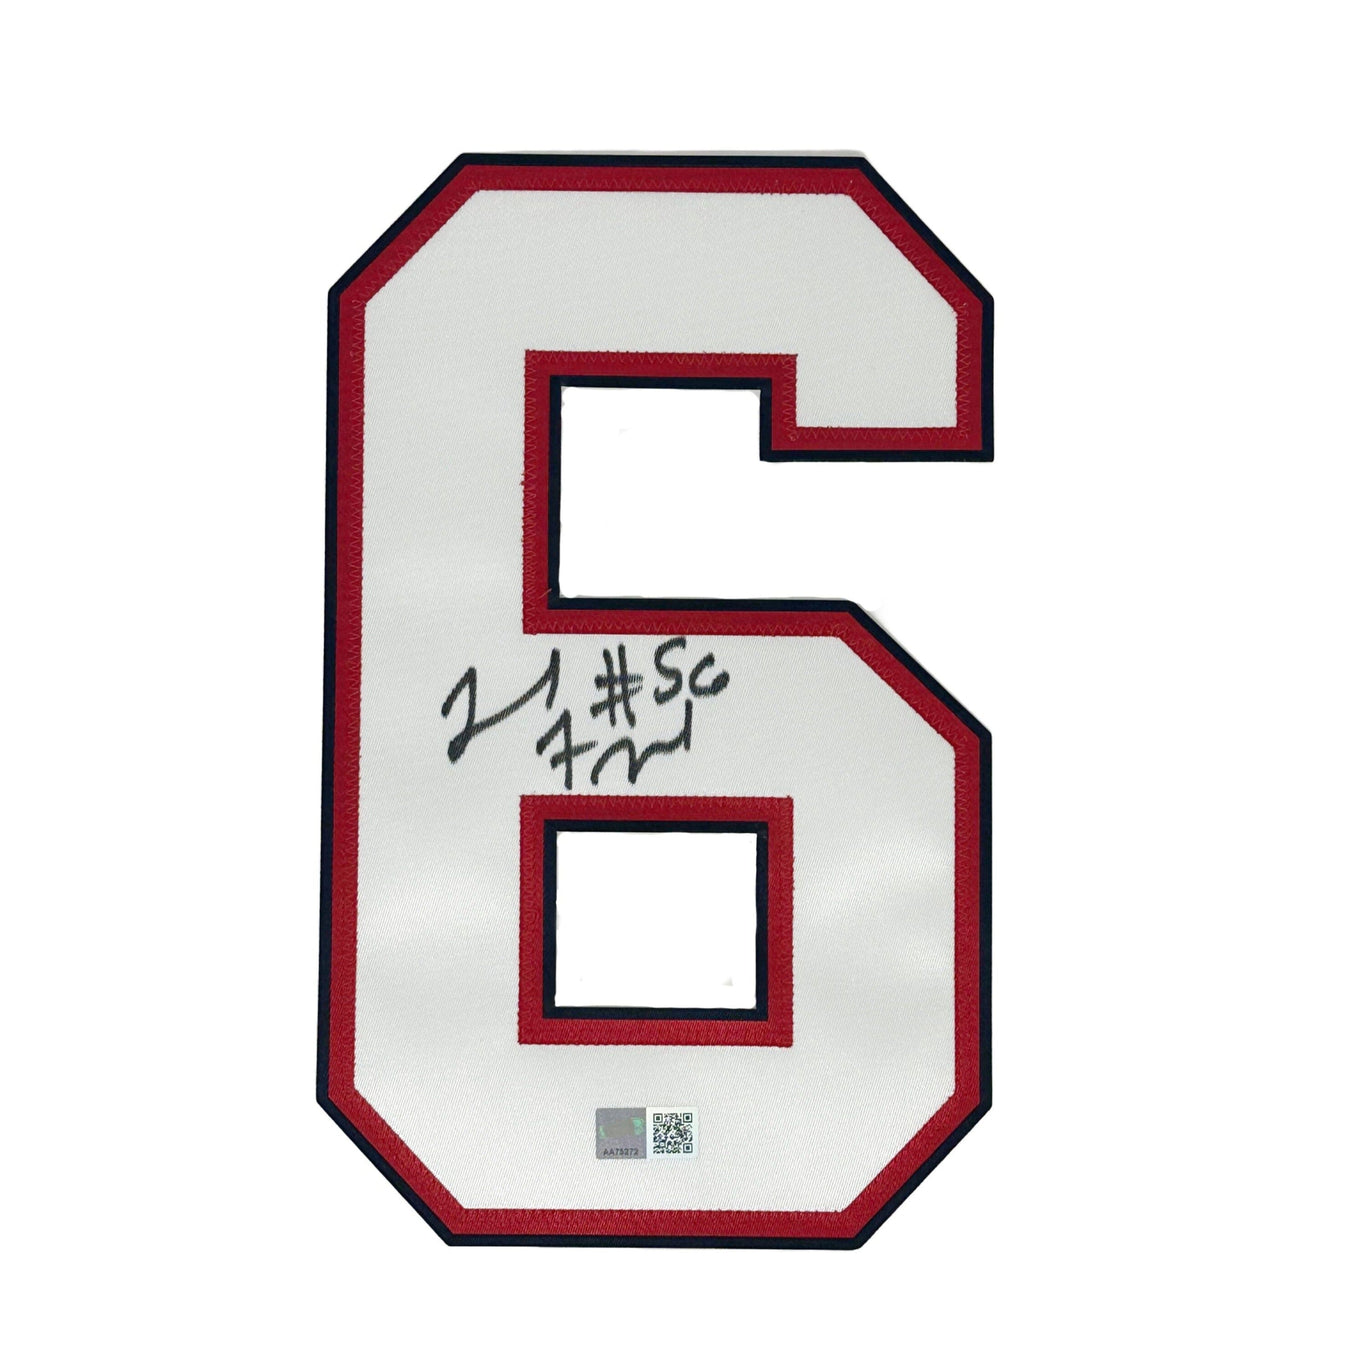 Signed Jersey #s